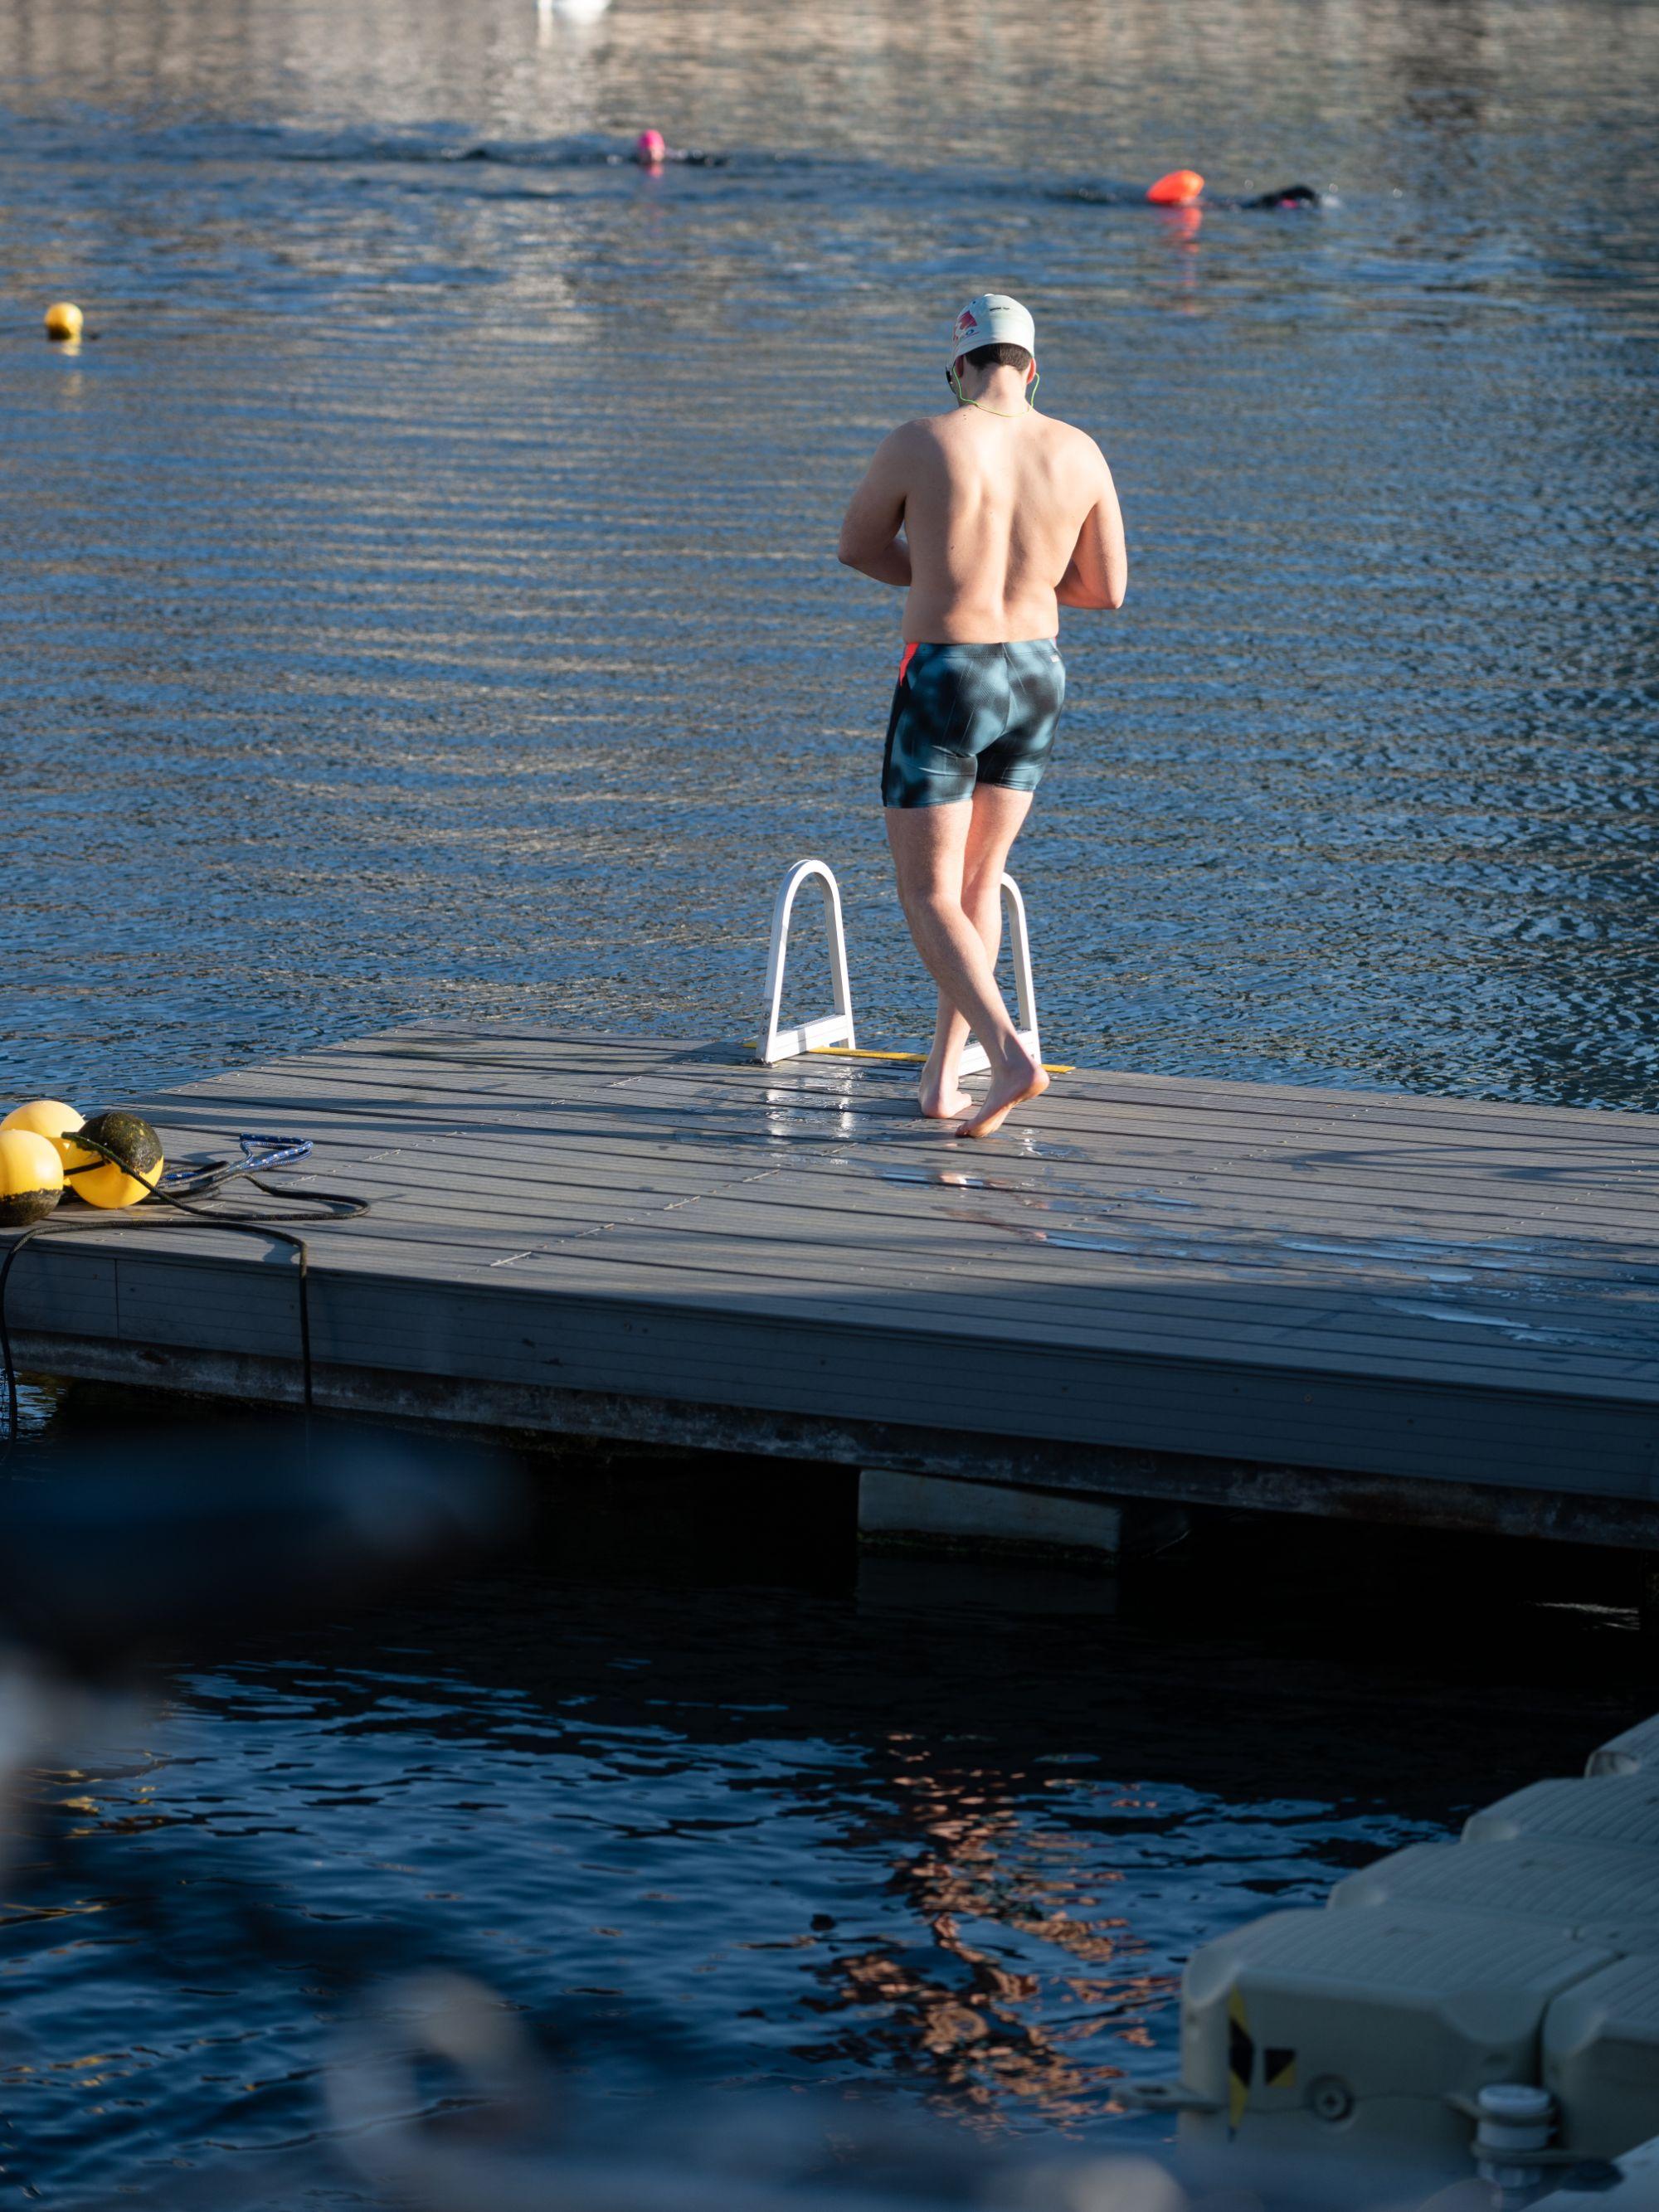 A man in trunks approaches the water